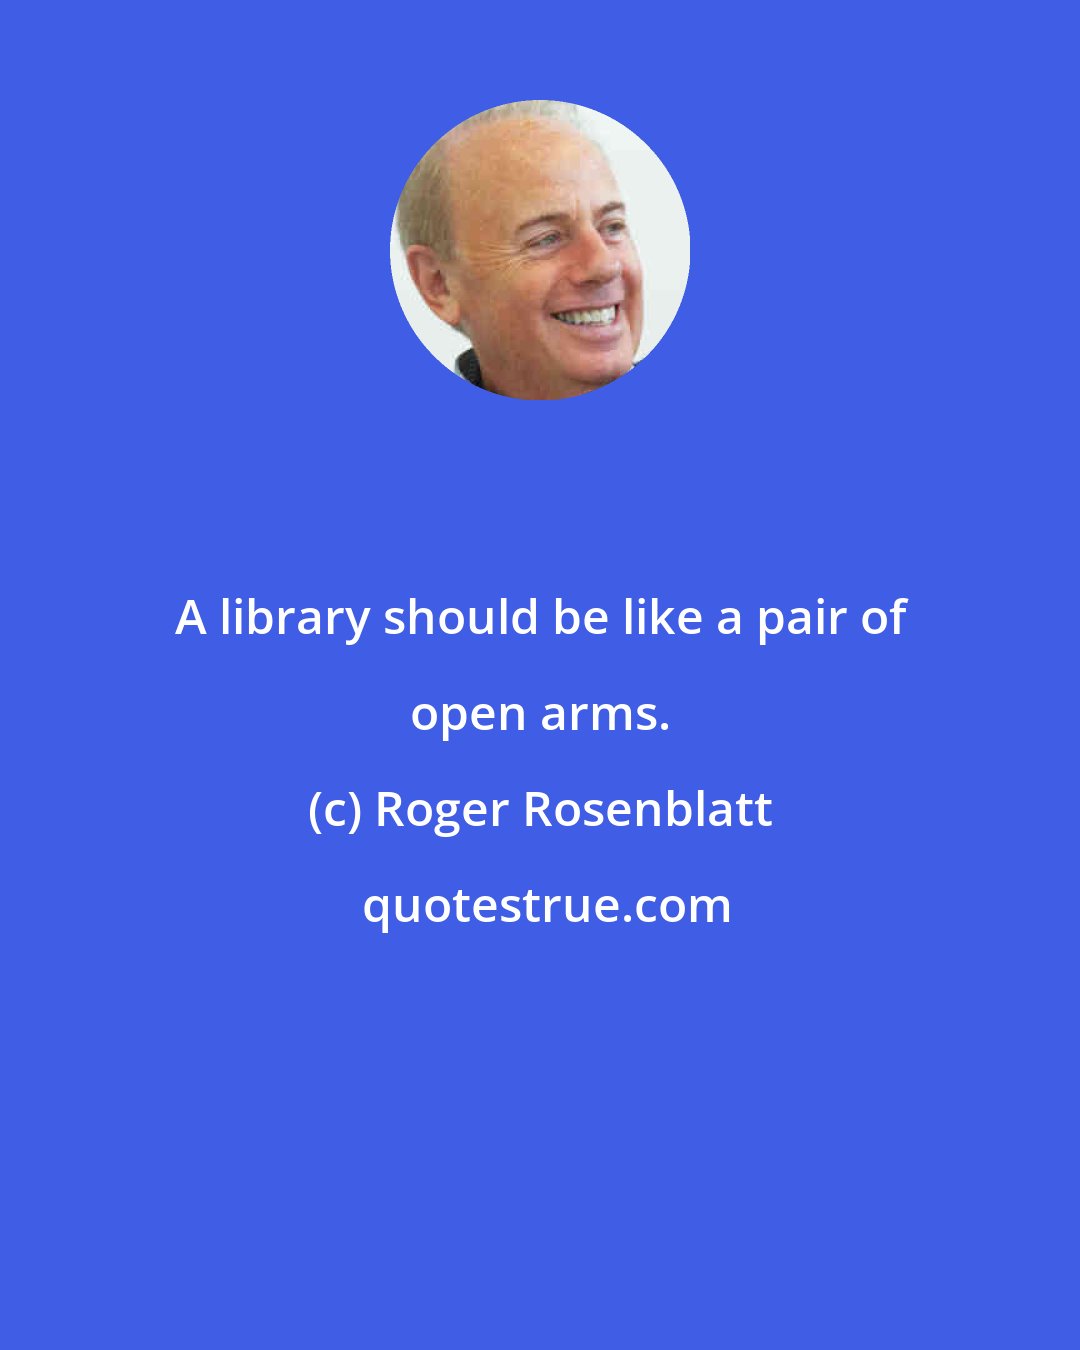 Roger Rosenblatt: A library should be like a pair of open arms.